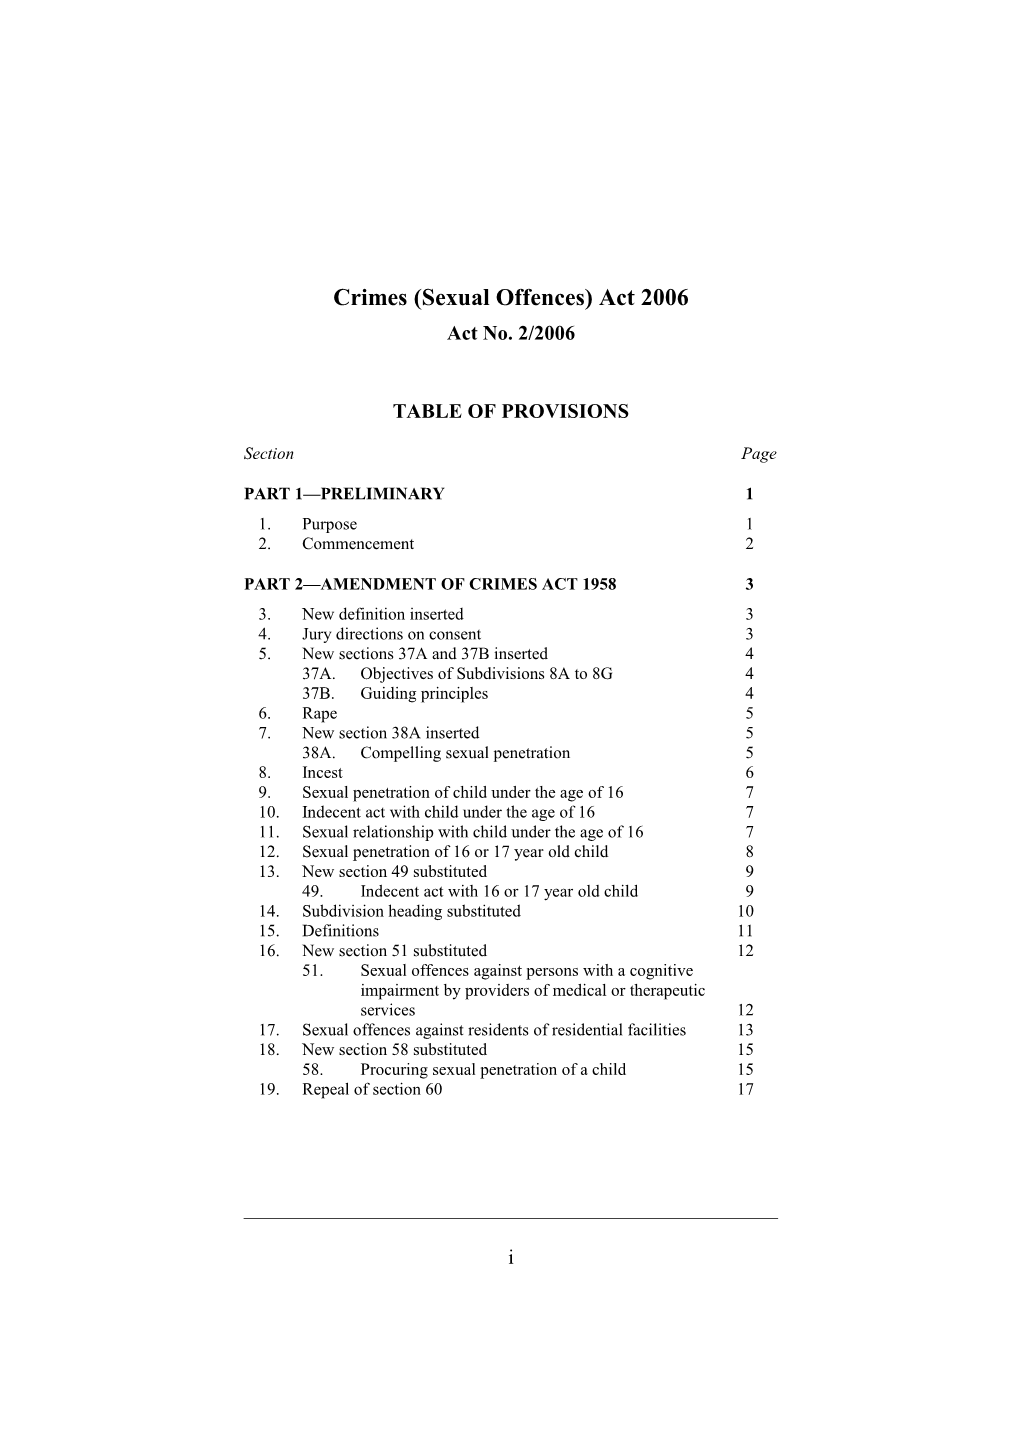 Crimes (Sexual Offences) Act 2006